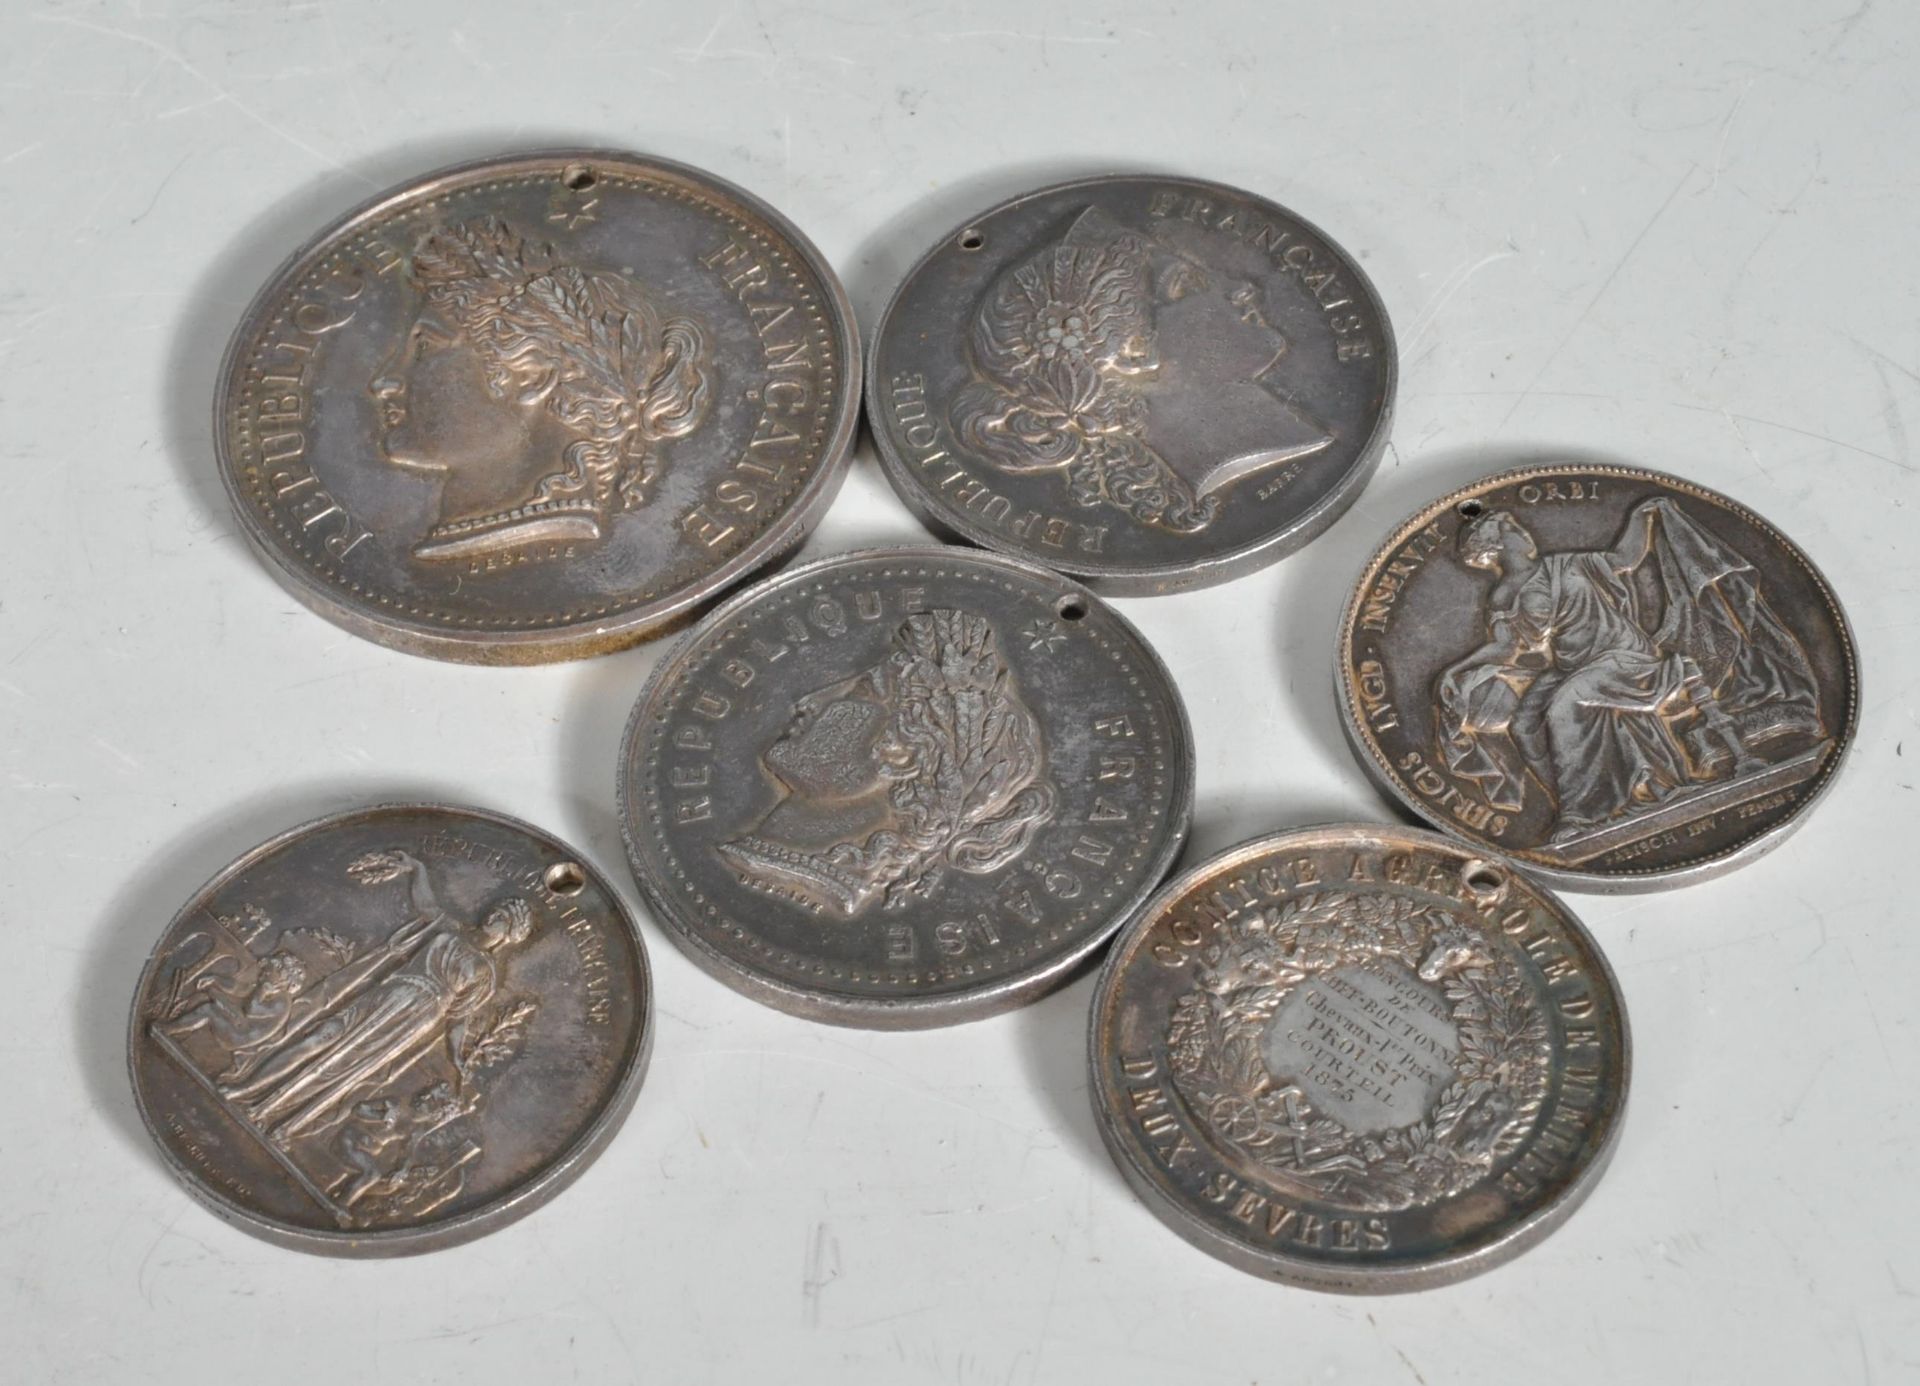 SIX 19TH CENTURY FRENCH AGRICULTURAL SILVER MEDALS